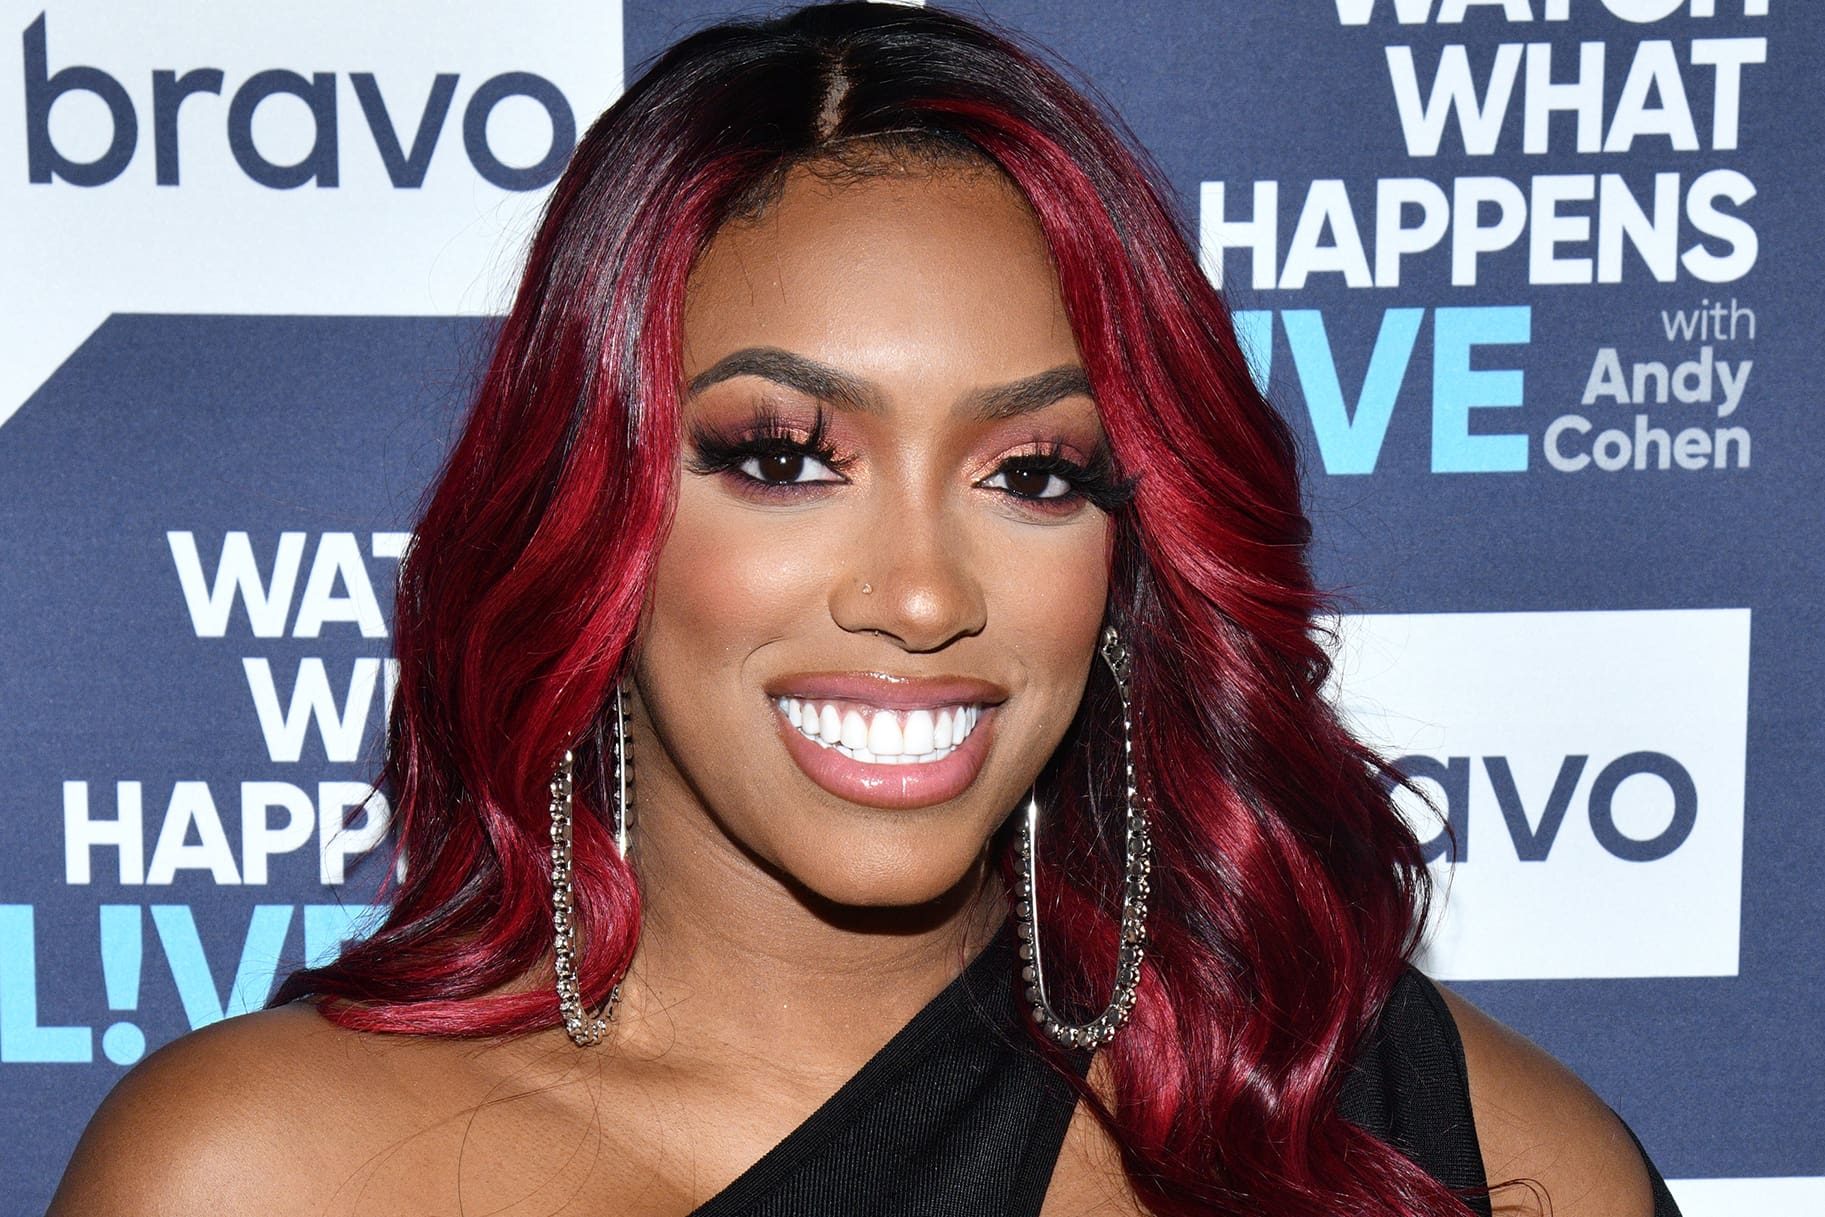 Porsha Williams Is Thinking About Children's Holidays During The Pandemic - See Her Message